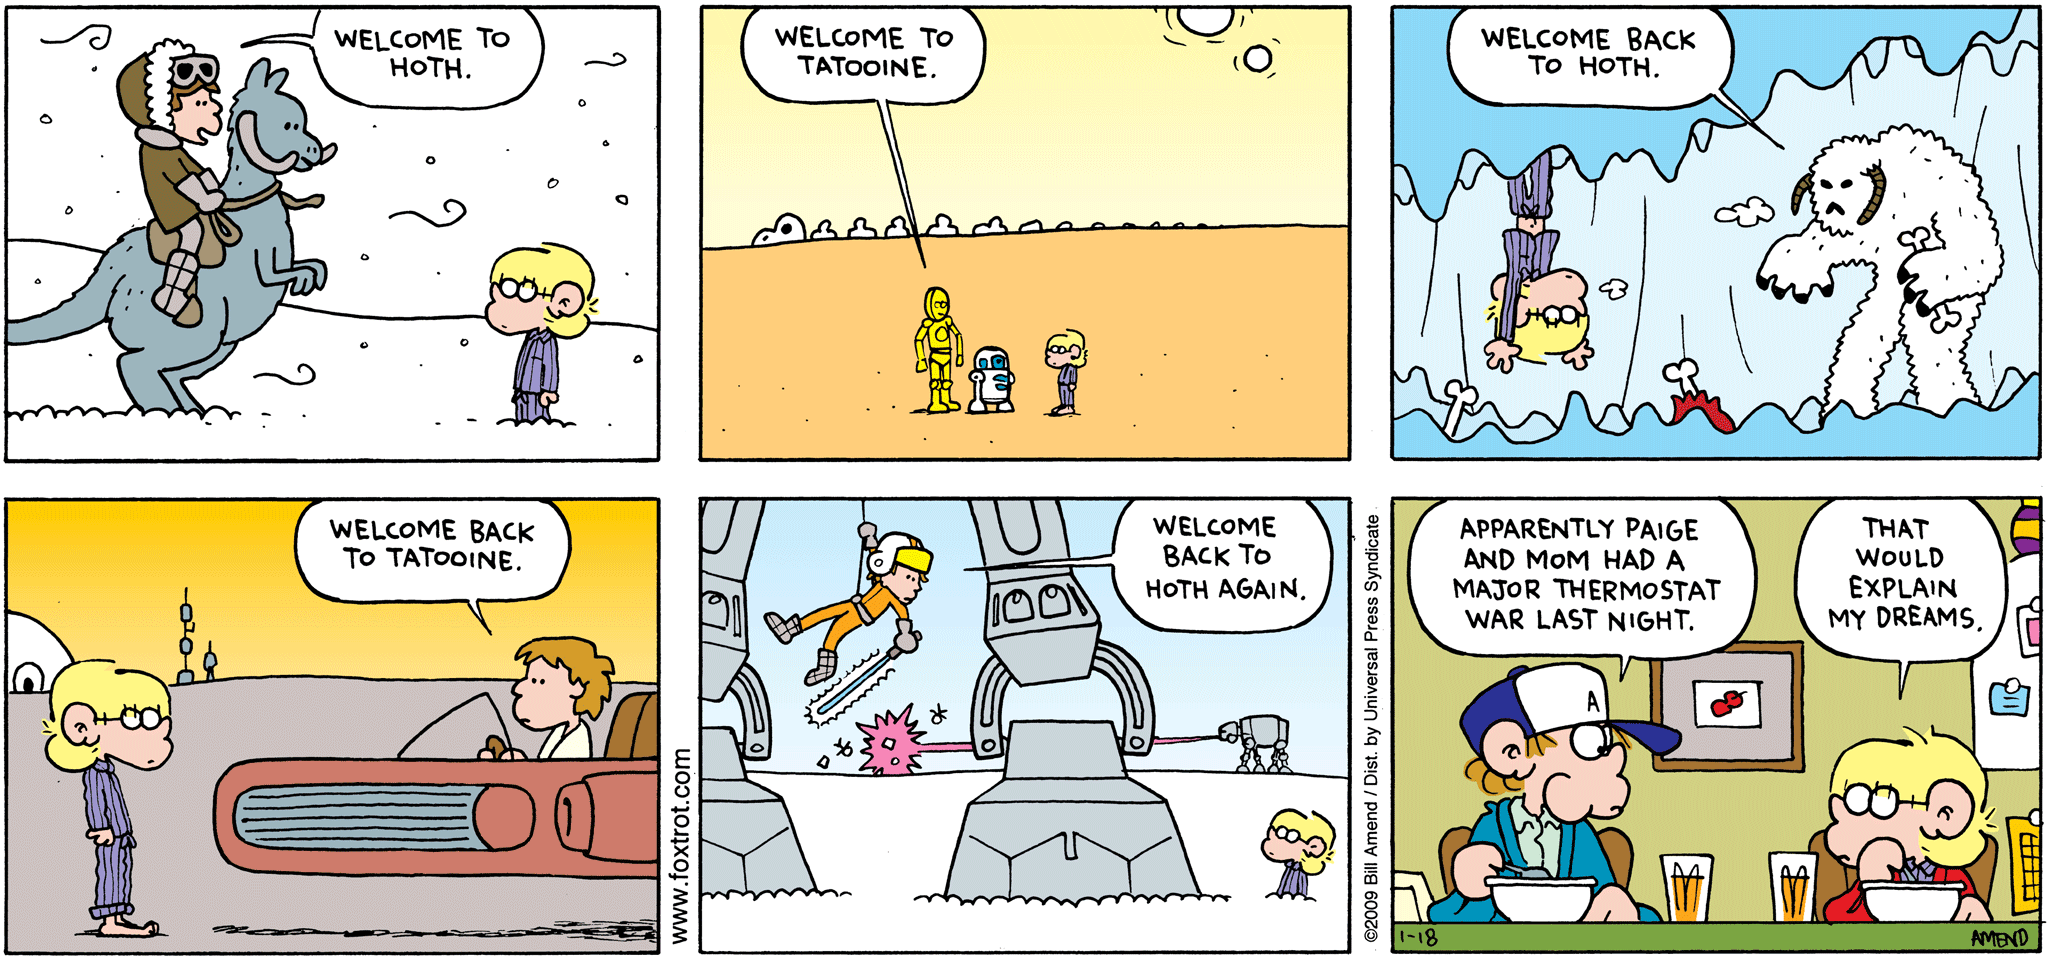 FoxTrot comic strip by Bill Amend - "Stat Wars" published January 18, 2009 - Han Solo: Welcome to Hoth. C3PO / R2D2: Welcome to Tatooine. Wampa Snow Monster: Welcome back to Hoth. Luke Skywalker: Welcome back to Tatooine. Luke Skywalker: Welcome back to Hoth again. Peter Fox: Apparently Paige and Mom had a major thermostat war last night. Jason Fox: That would explain my dreams.